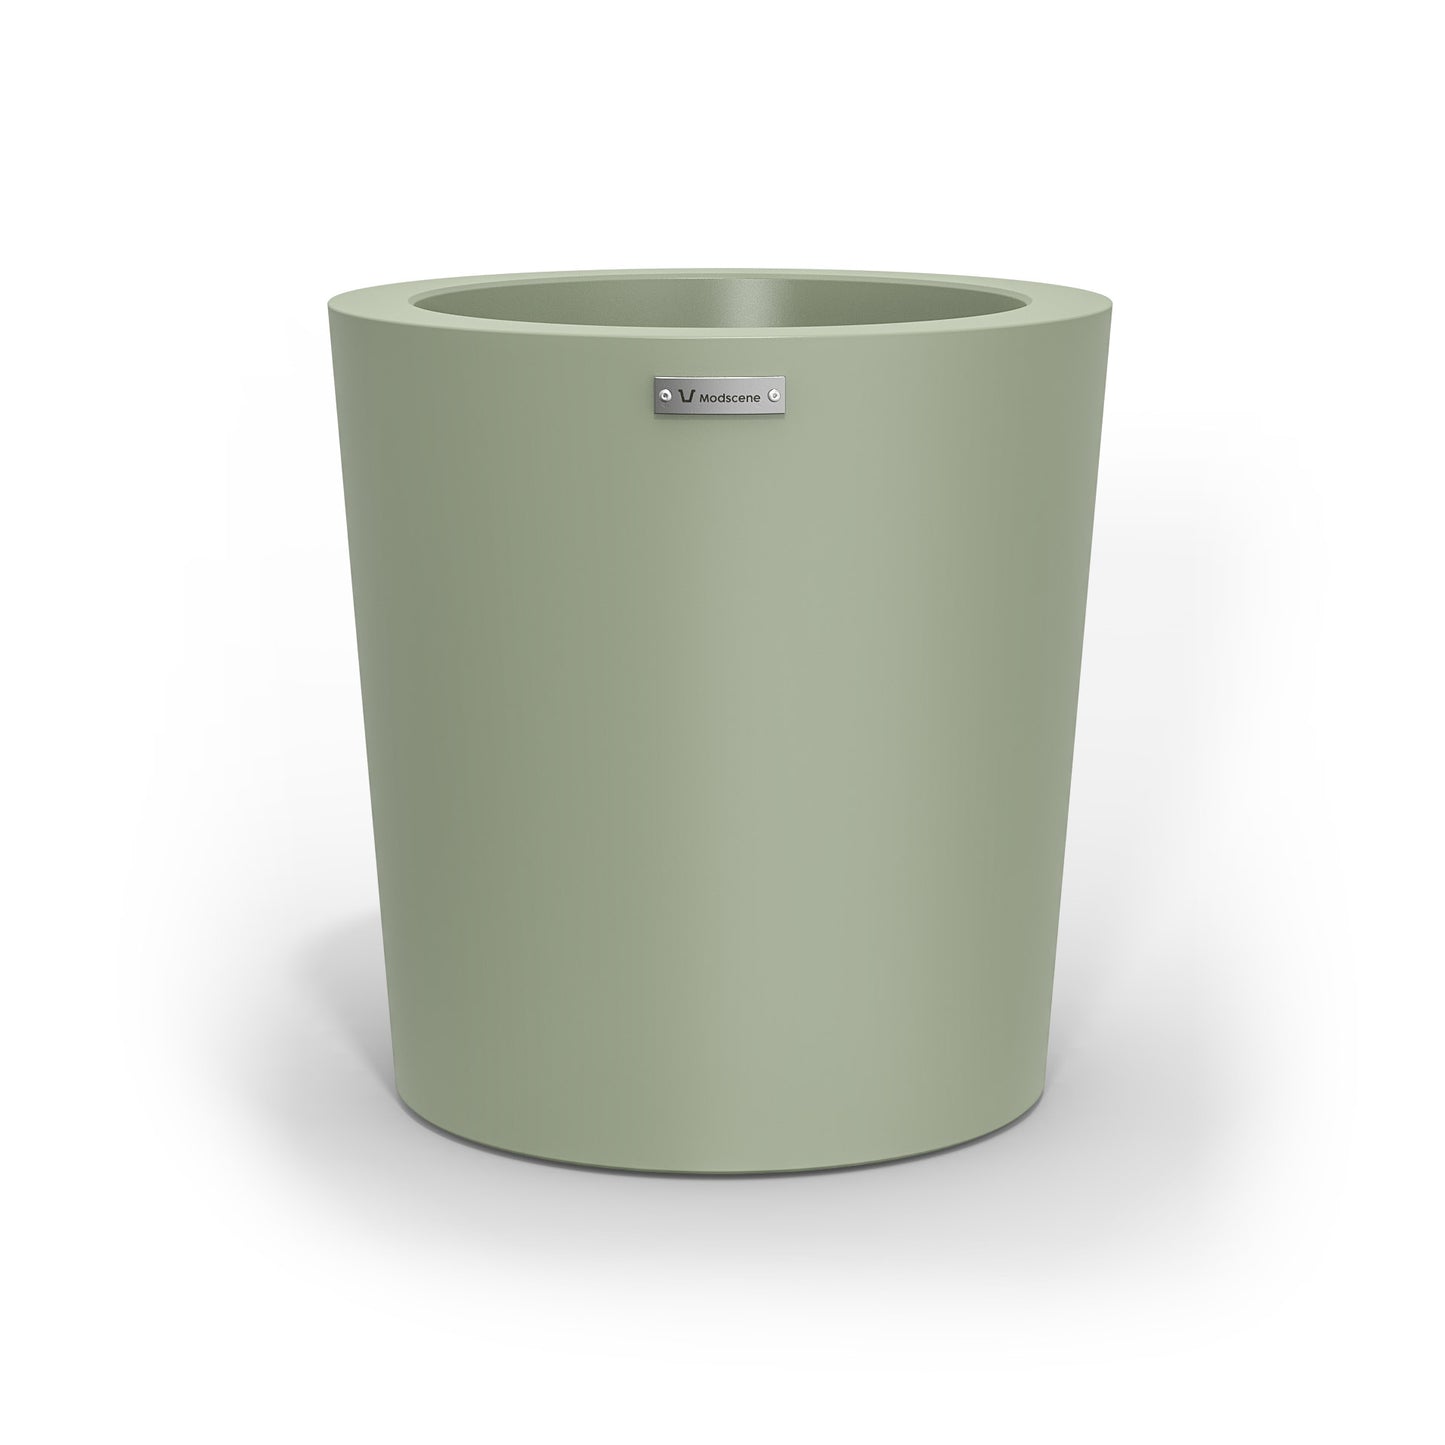 A modern style planter pot in a pastel green colour. Made by Modscene NZ.